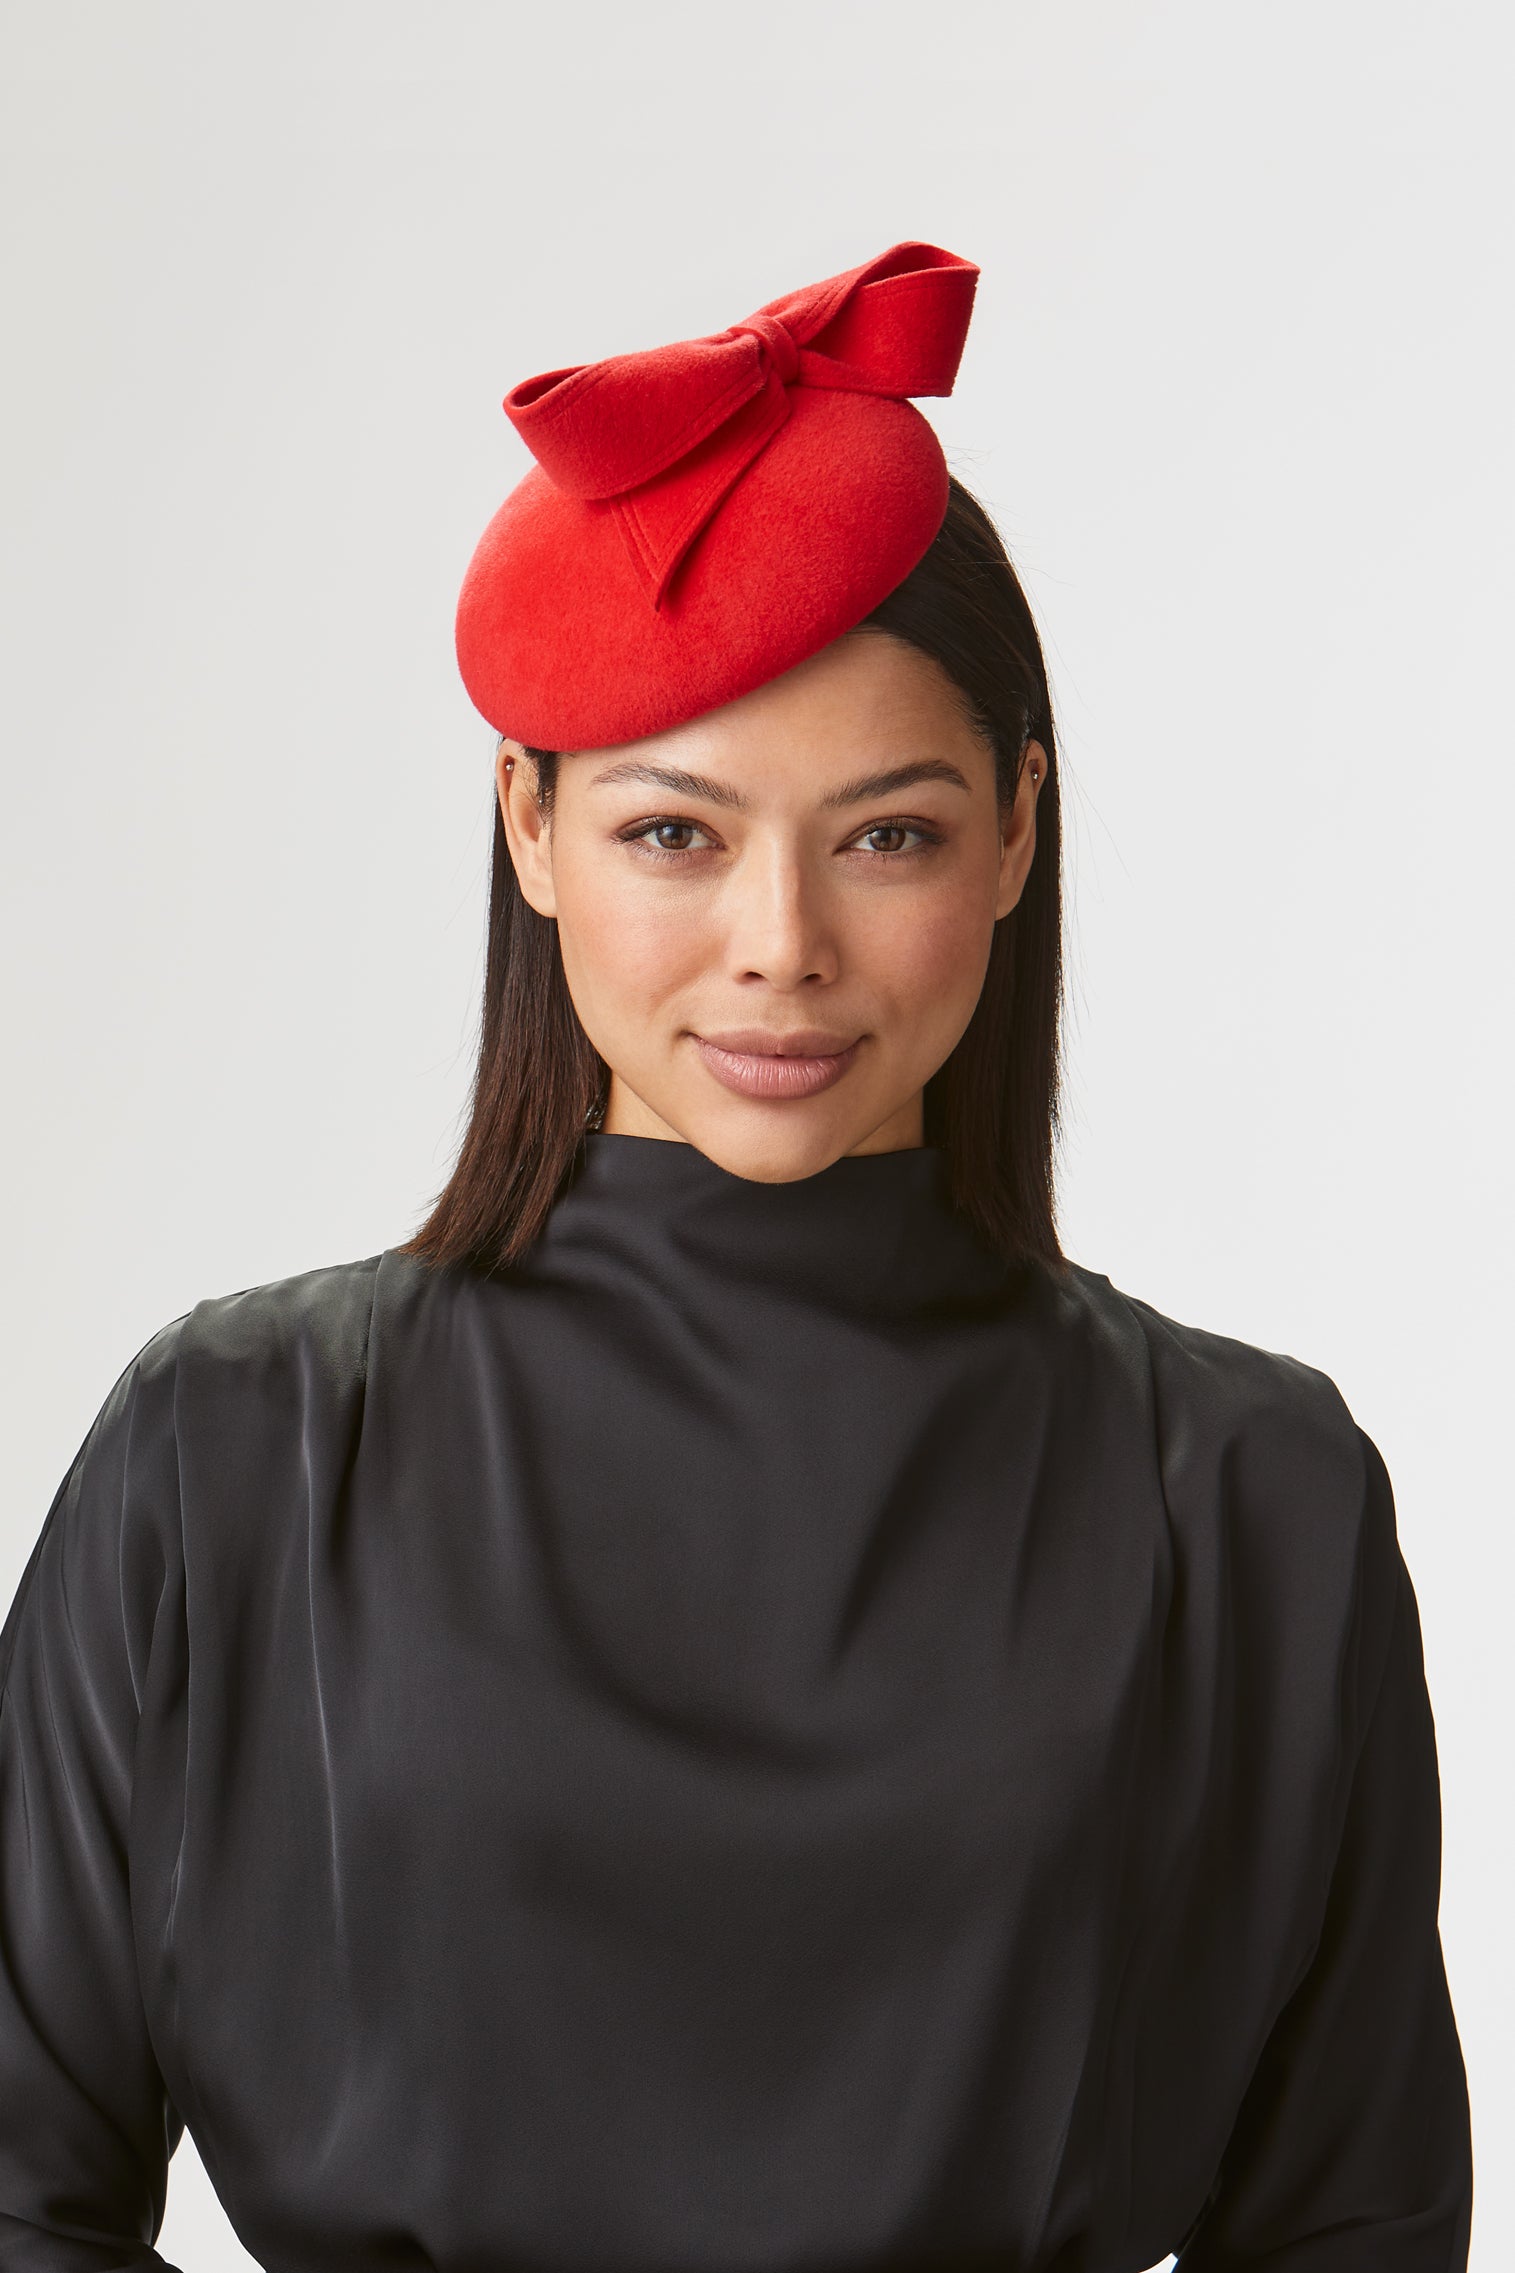 Lana Red Button Hat - Hats for Cheltenham Races - Lock & Co. Hatters London UK